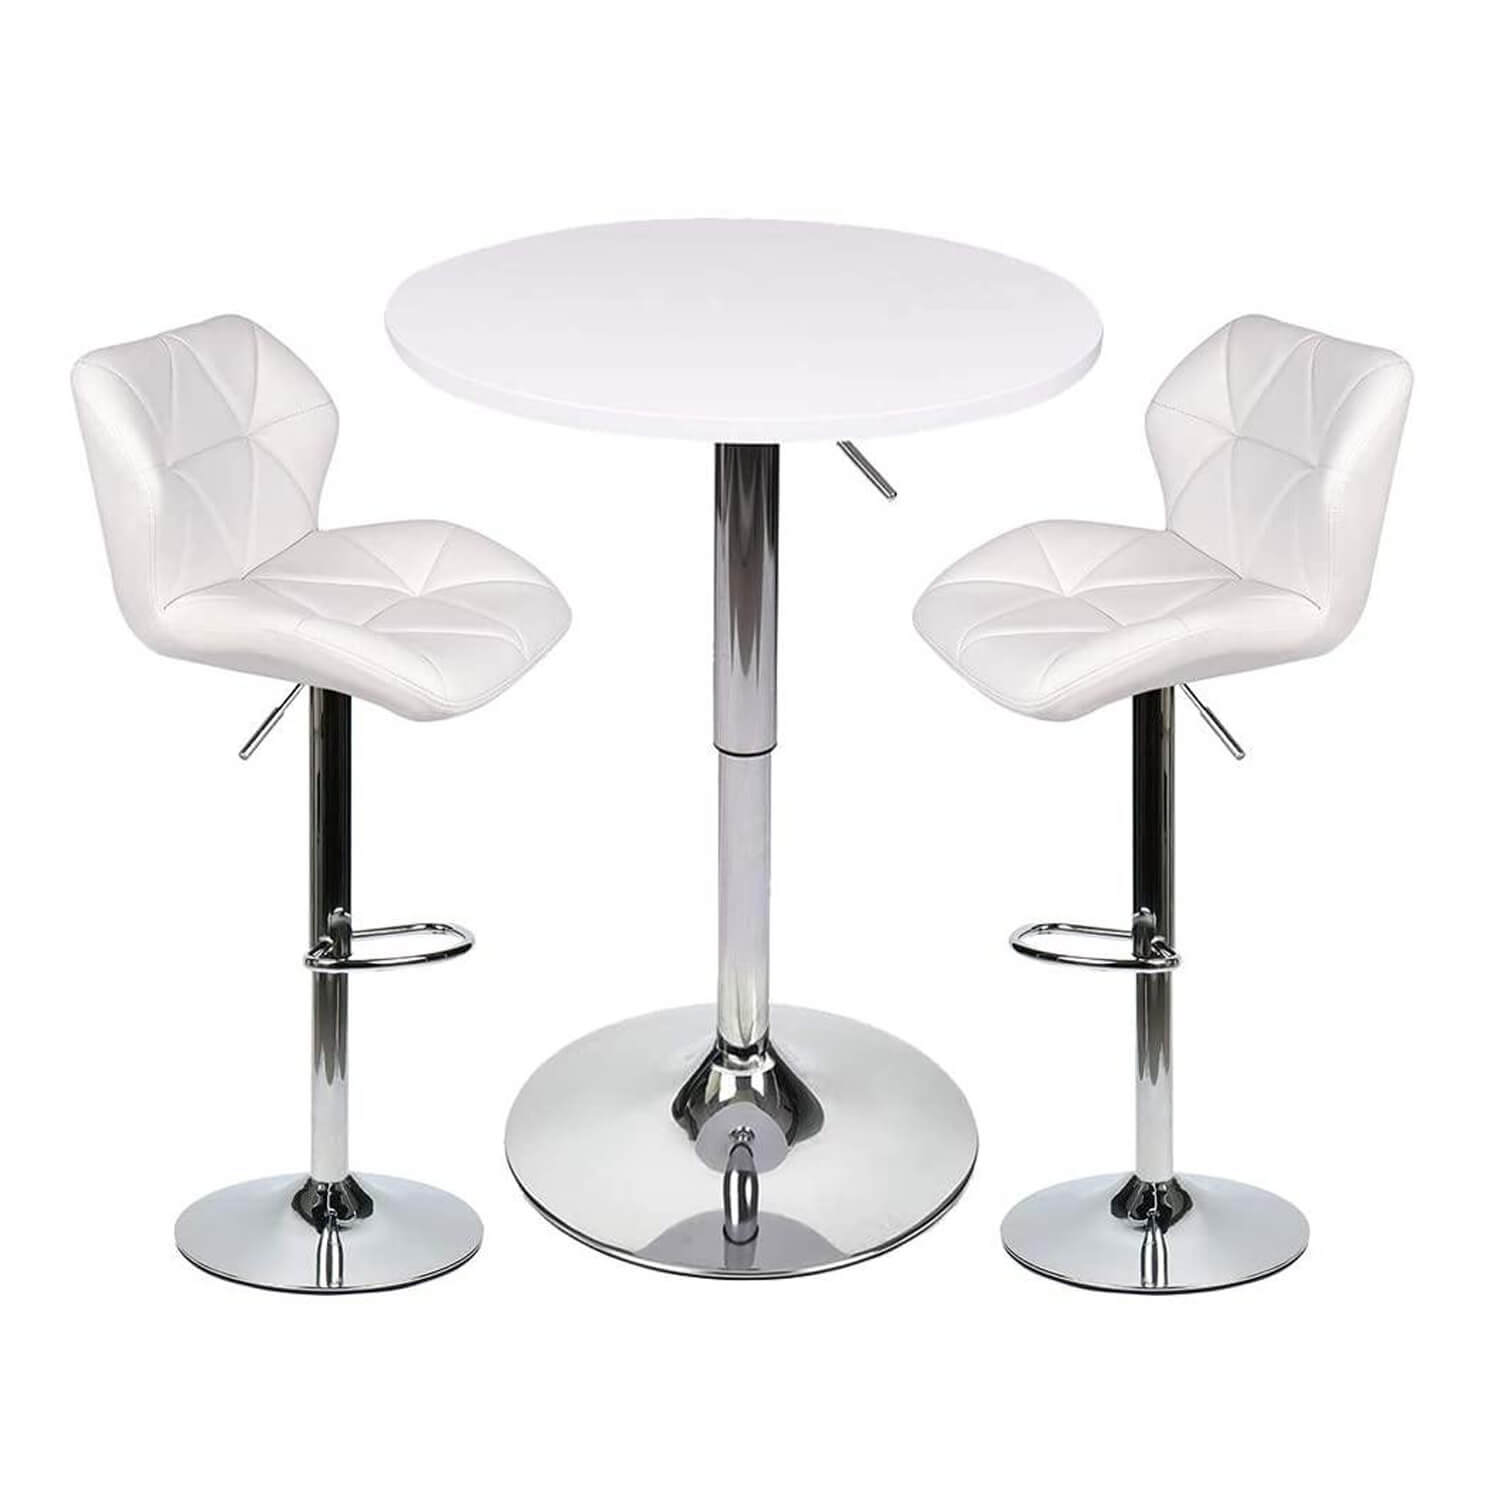 Elecwish Bar Table Set 3-Piece OW0301 white bar table with white bar stools